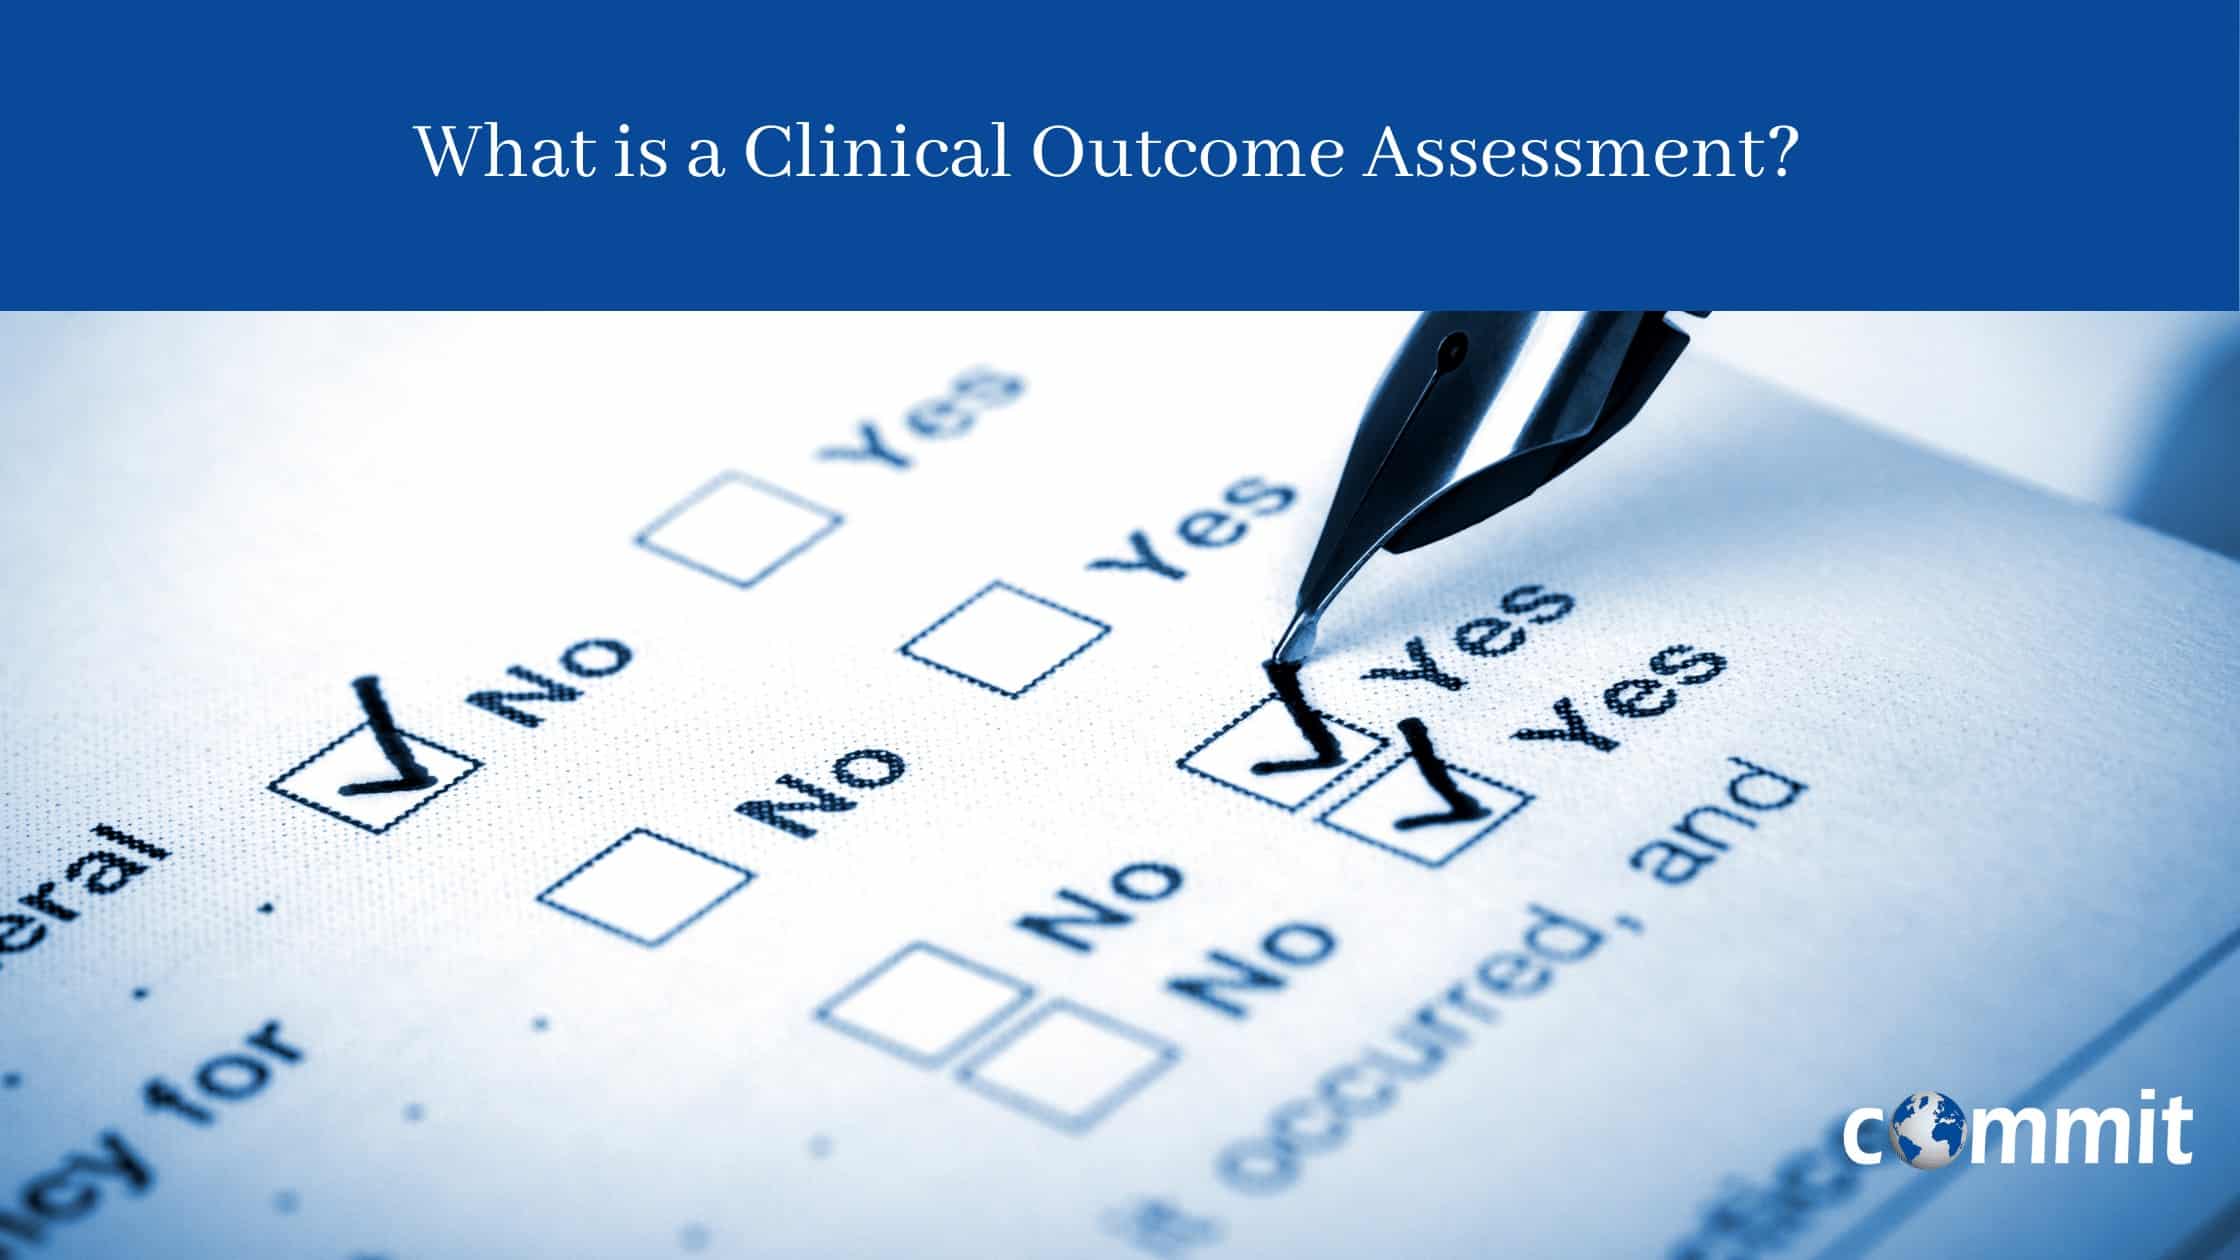 What is a Clinical Outcome Assessment?